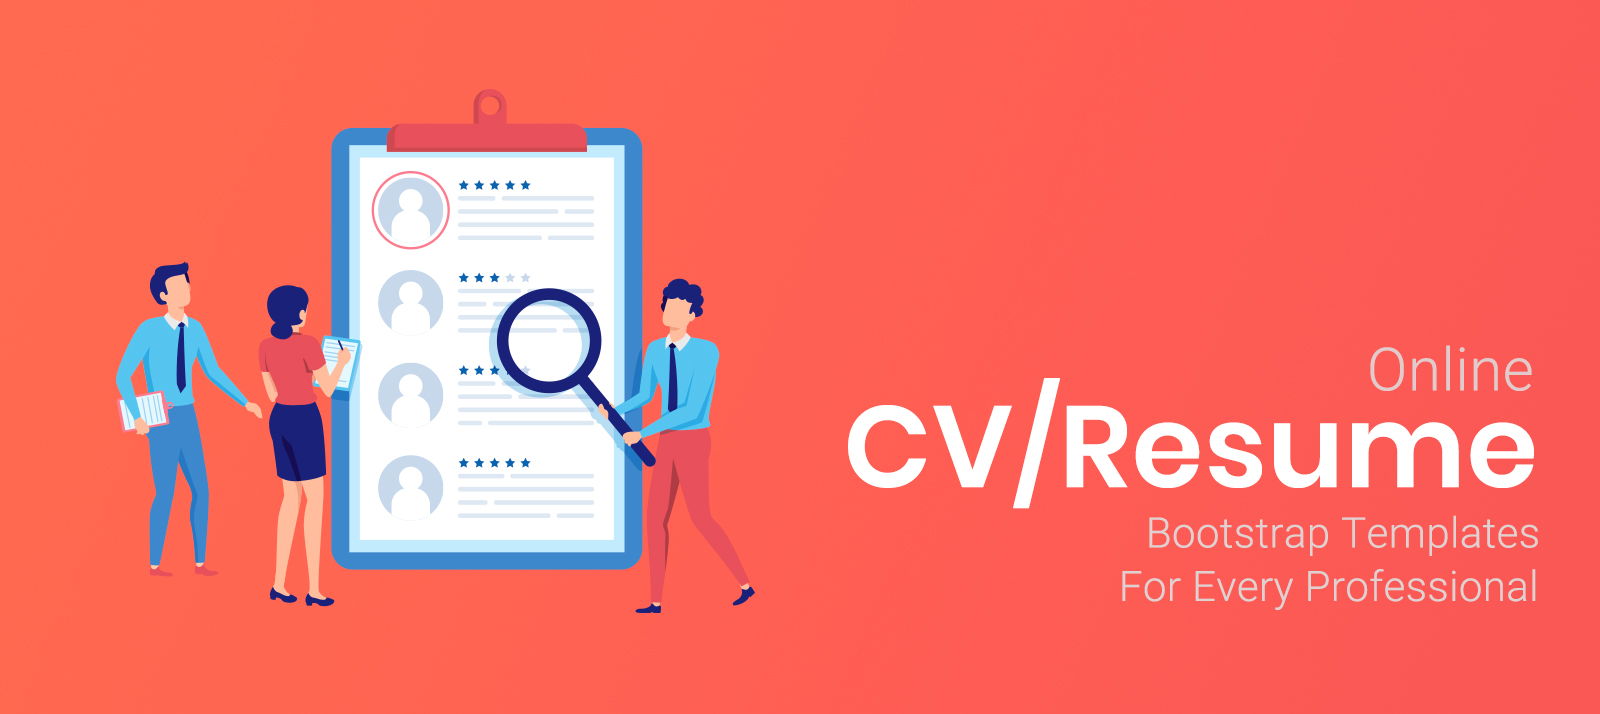  Free and Premium Online CV/Resume Bootstrap Templates For Every Professional 